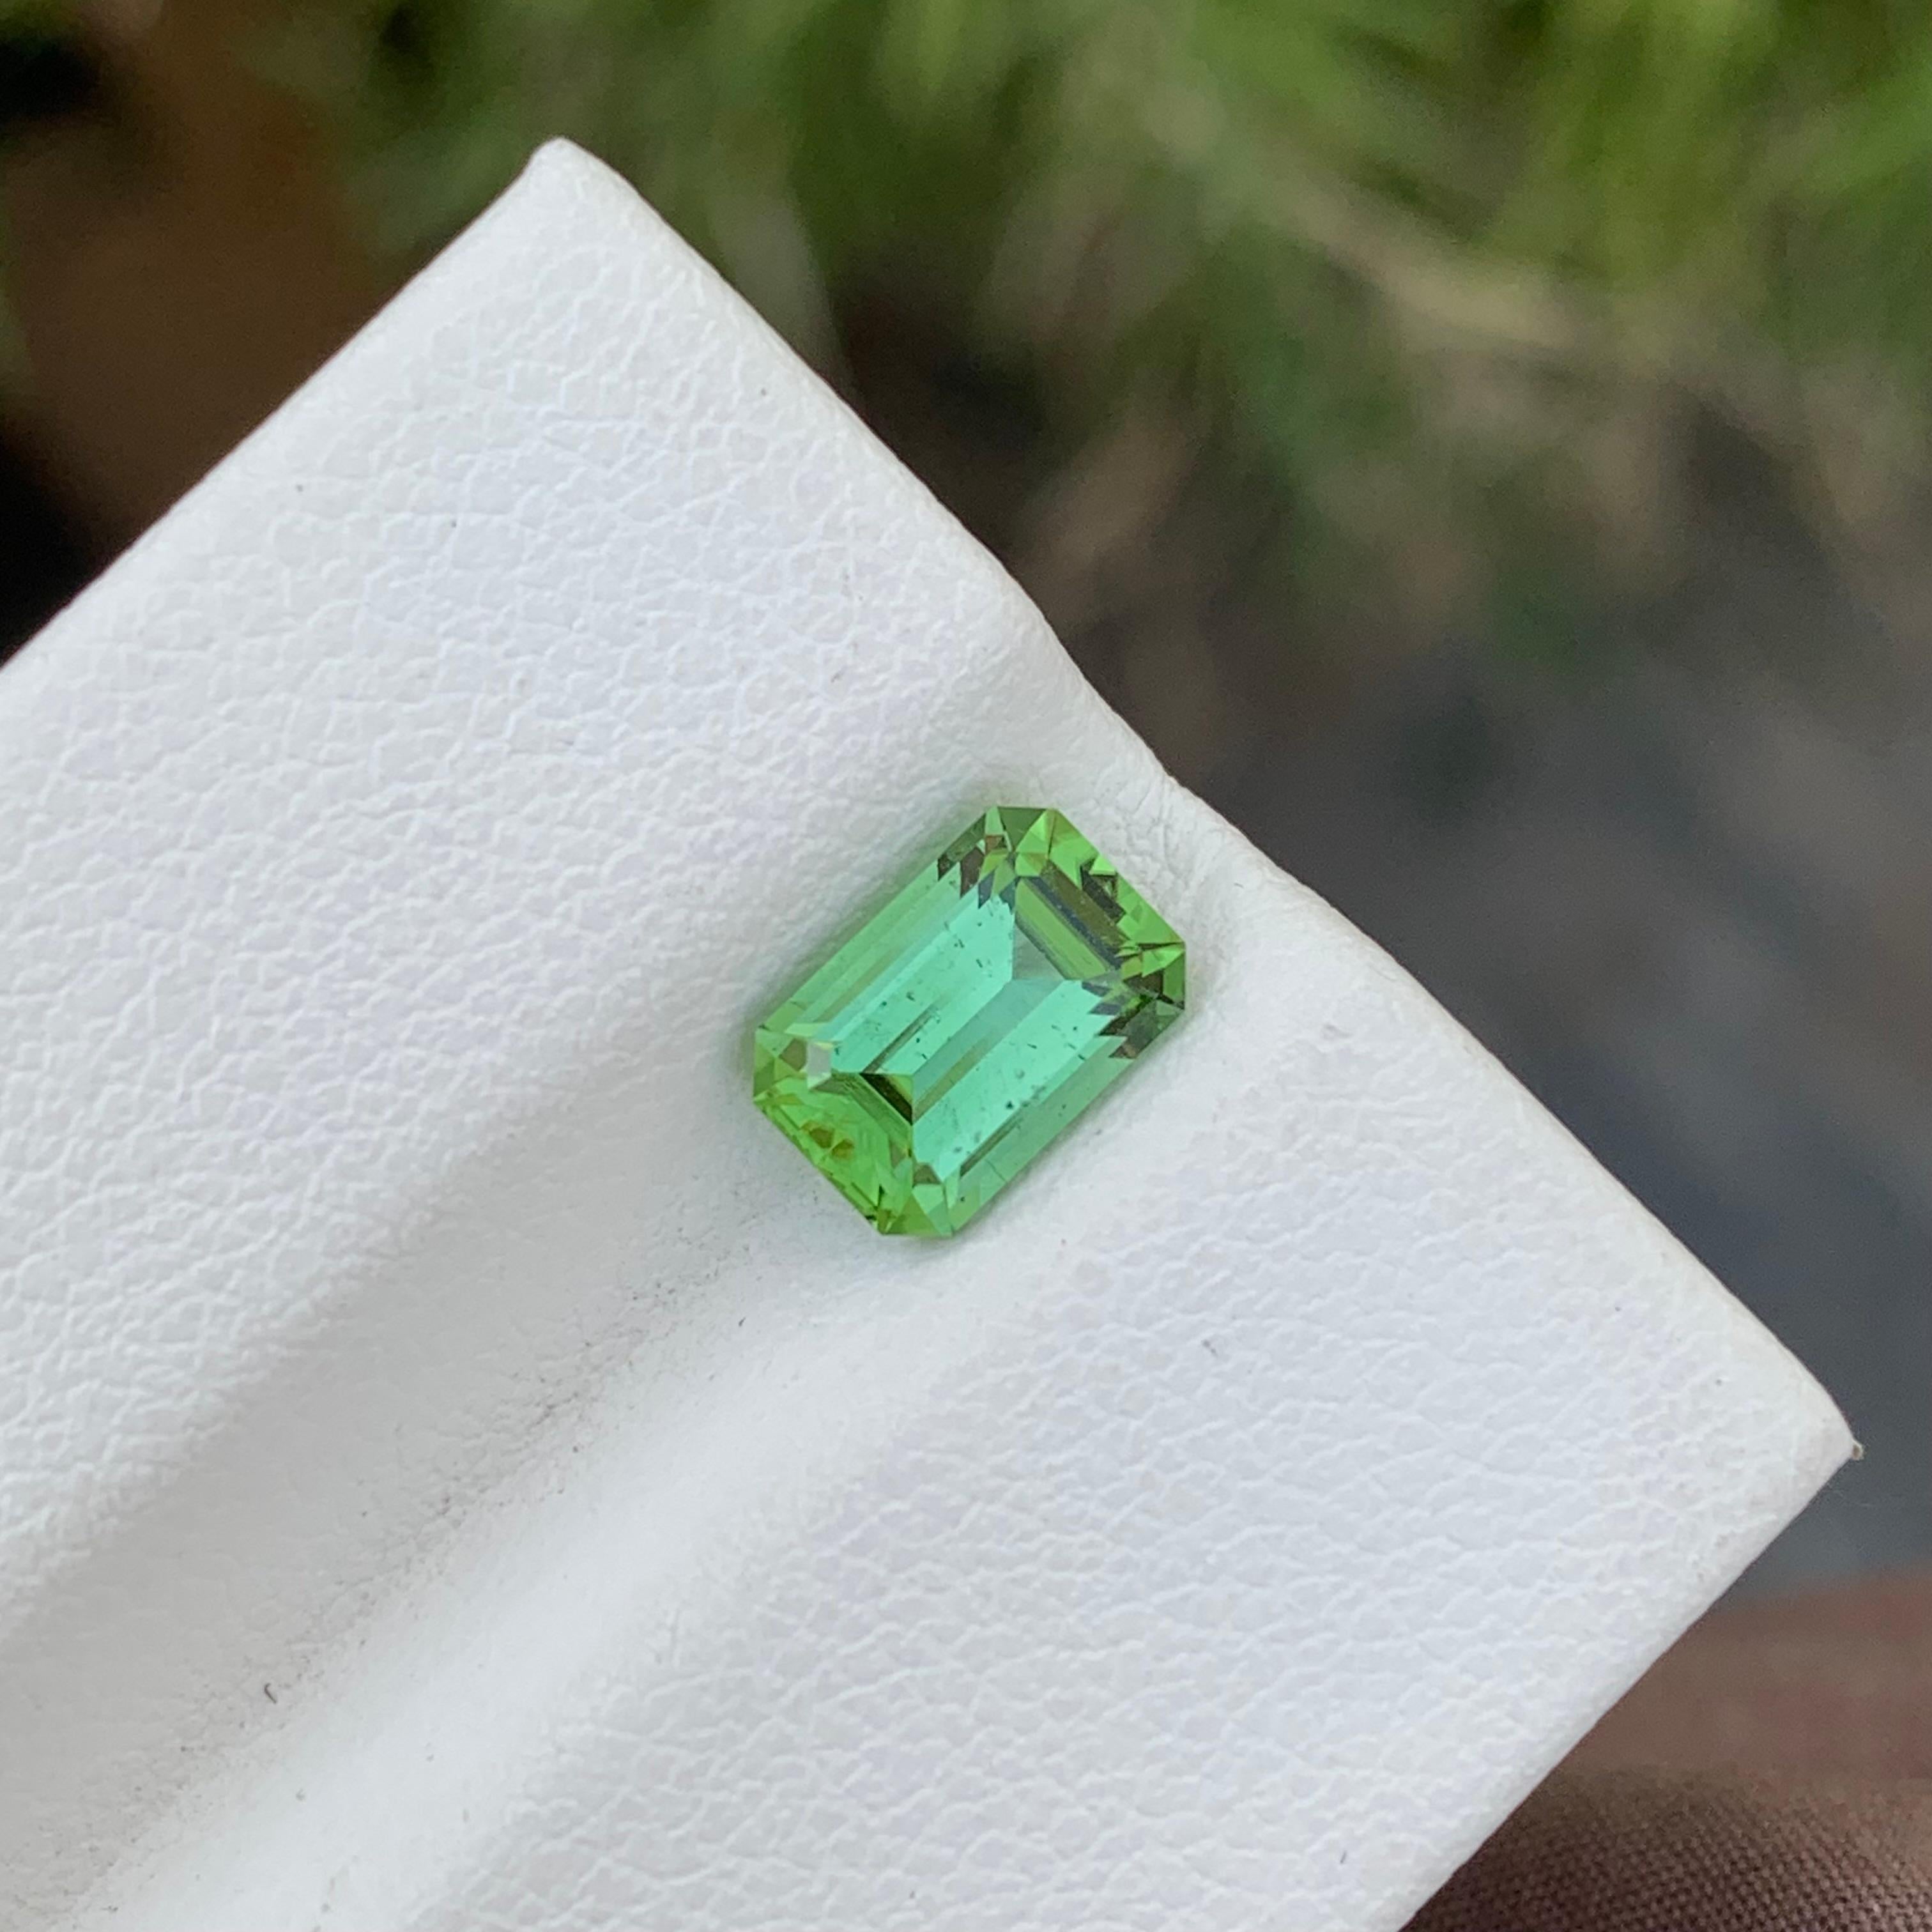 Loose Mint Green Tourmaline
Weight: 1.45 Carats
Dimension: 7.8 x 5.2 x 4 Mm
Colour: Mint Green
Origin: Afghanistan
Certificate: On Demand
Treatment: Non

Tourmaline is a captivating gemstone known for its remarkable variety of colors, making it a